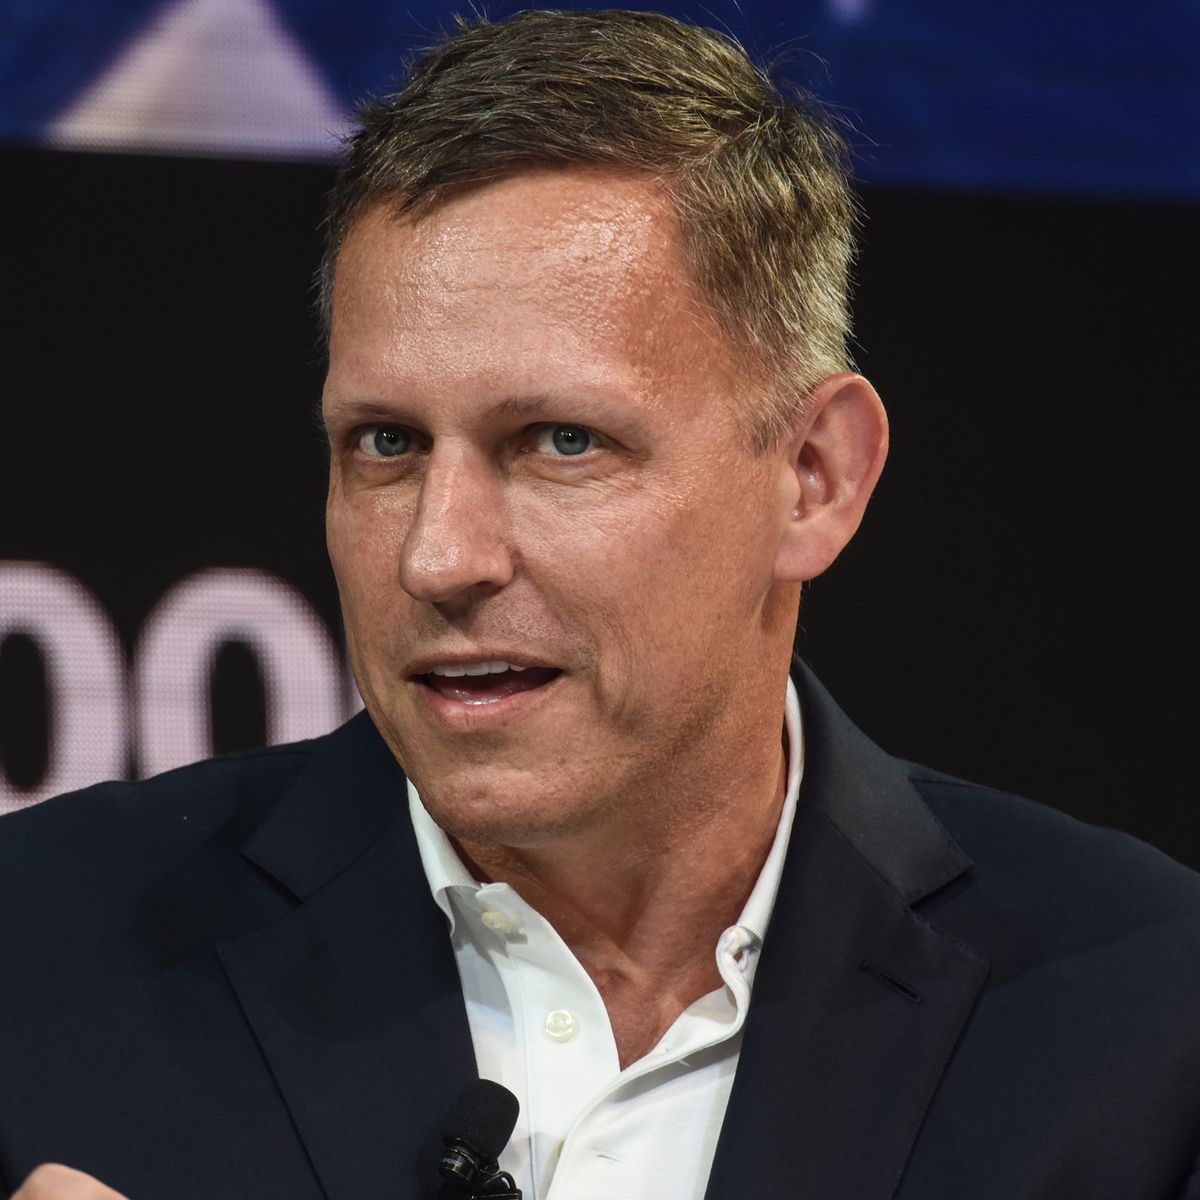 Are monopolies good? Peter Thiel (of Paypal founding and Facebook